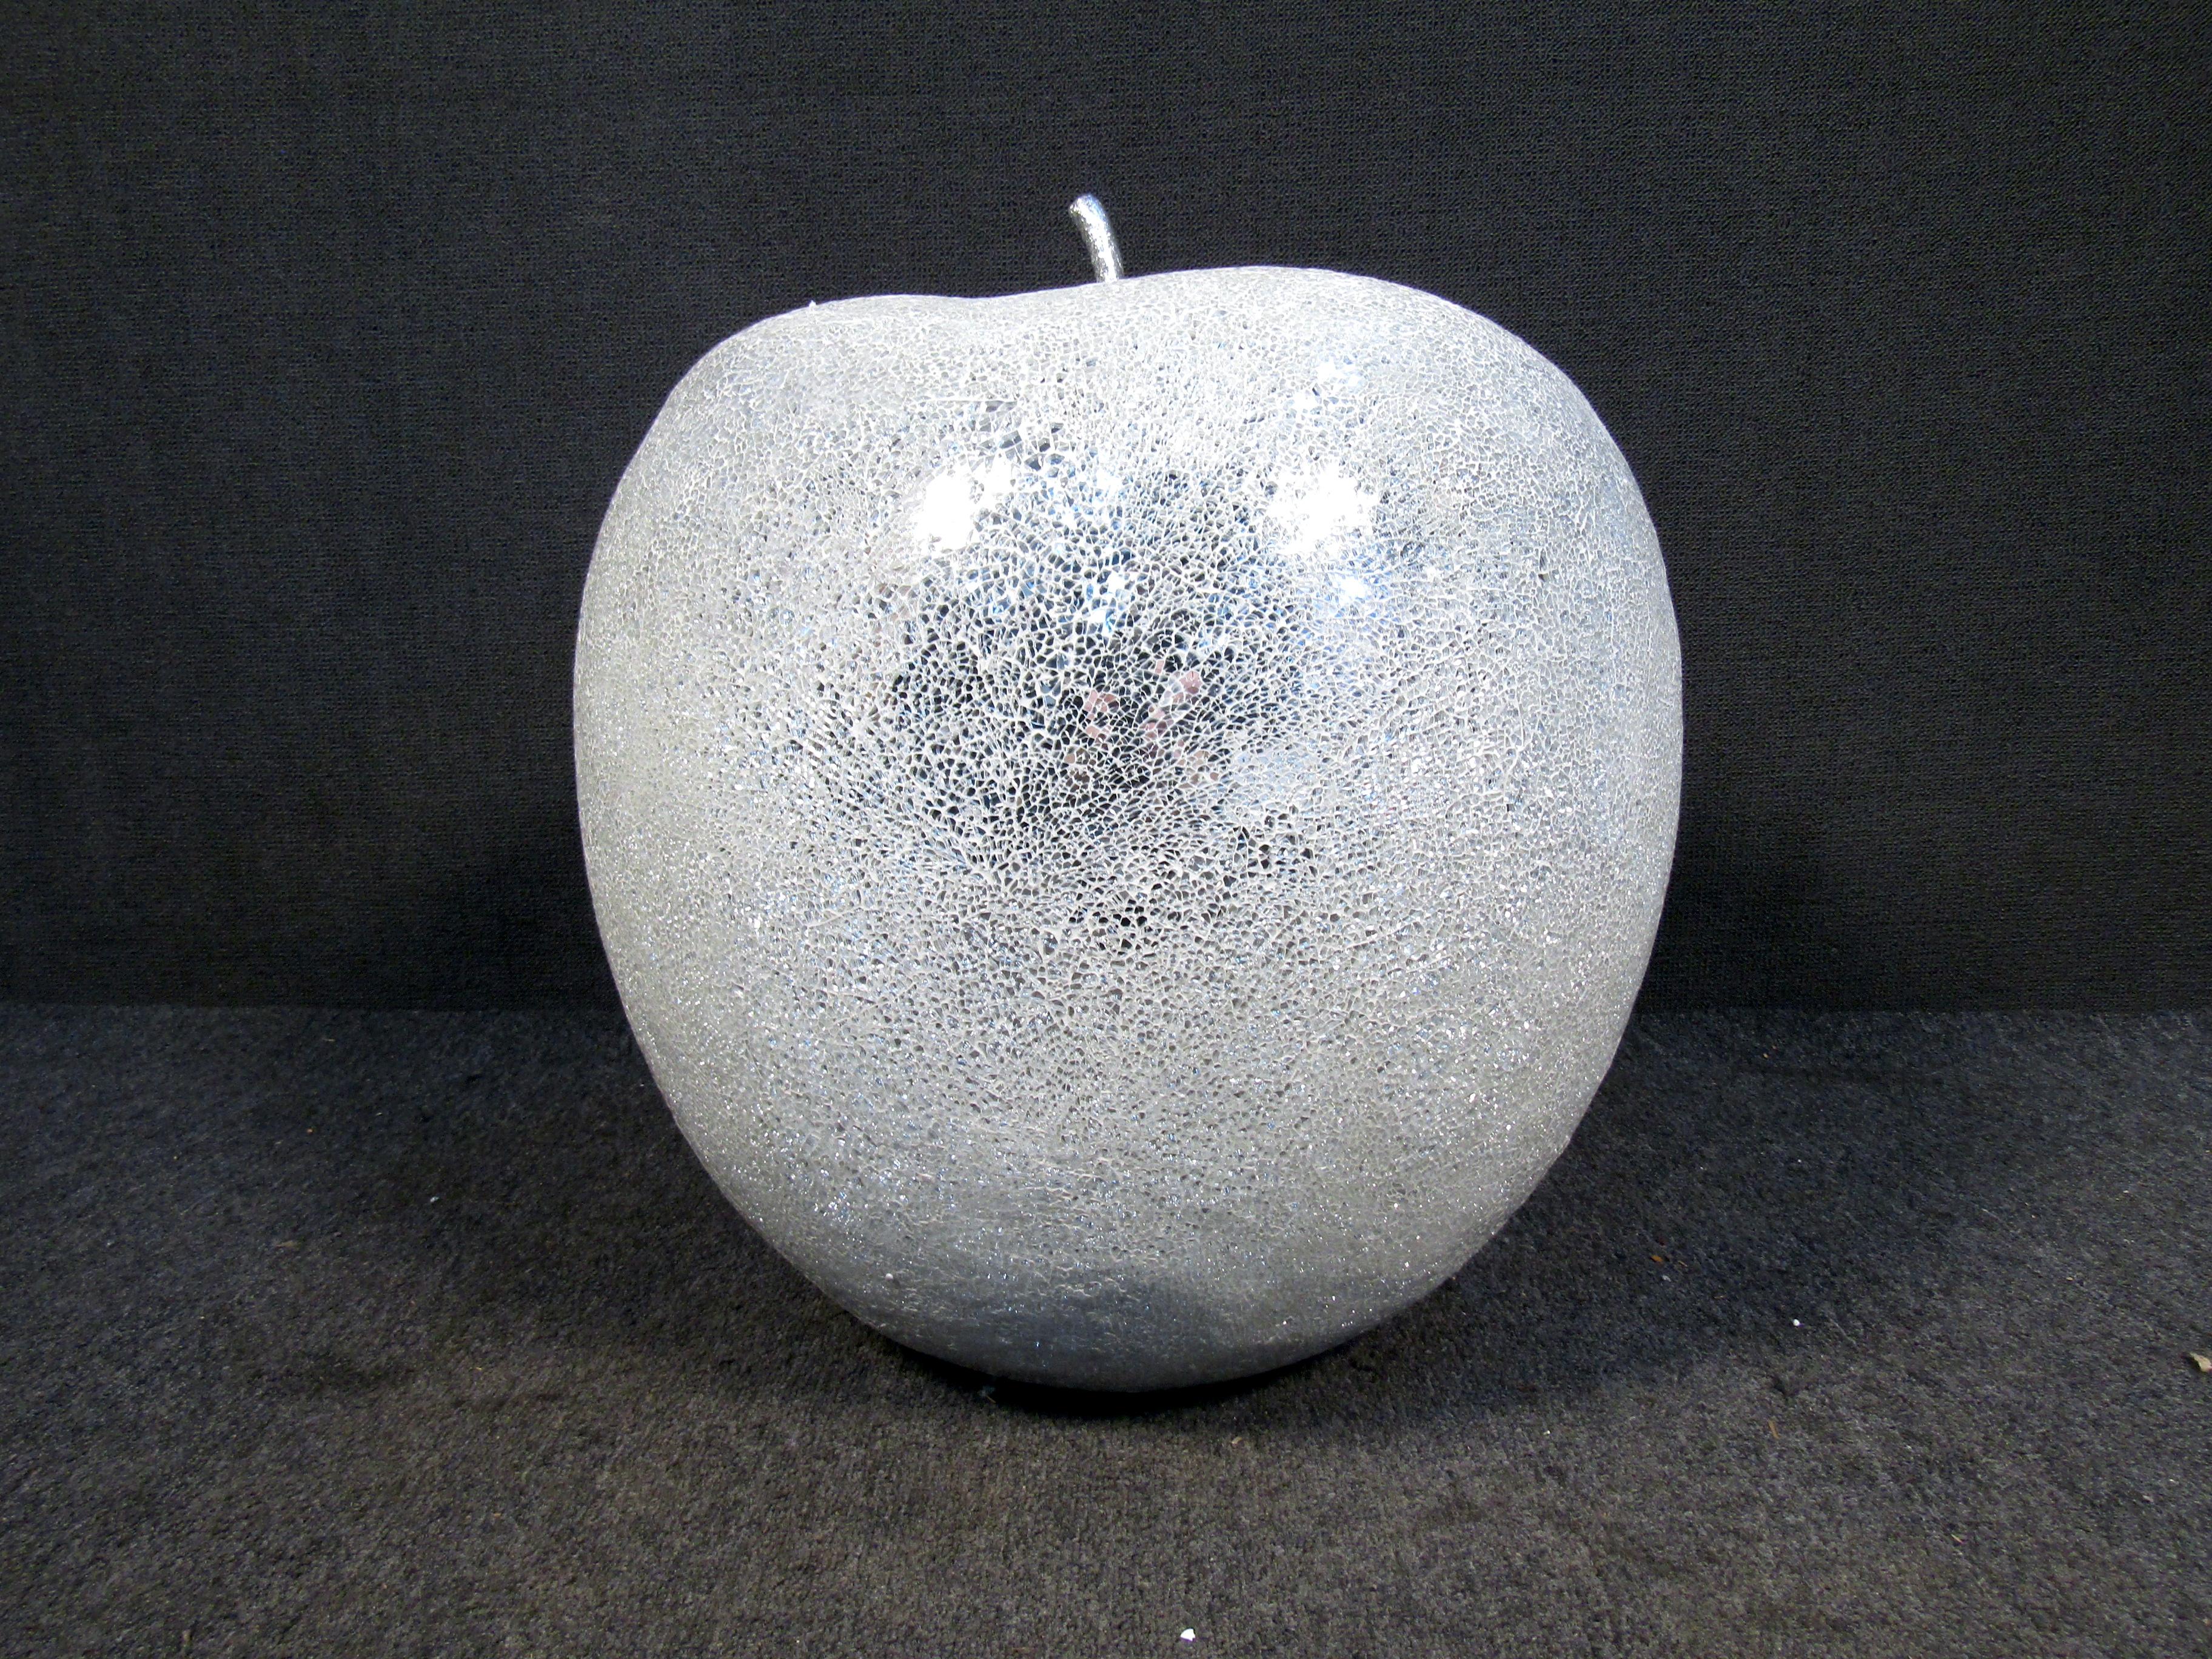 This mirror glass mosaic apple is quite the eye catcher due to its size. The sculpture will be the head of conversation no matter what living or office space you chose ton put add this in.
Please confirm item location (NJ or NY).